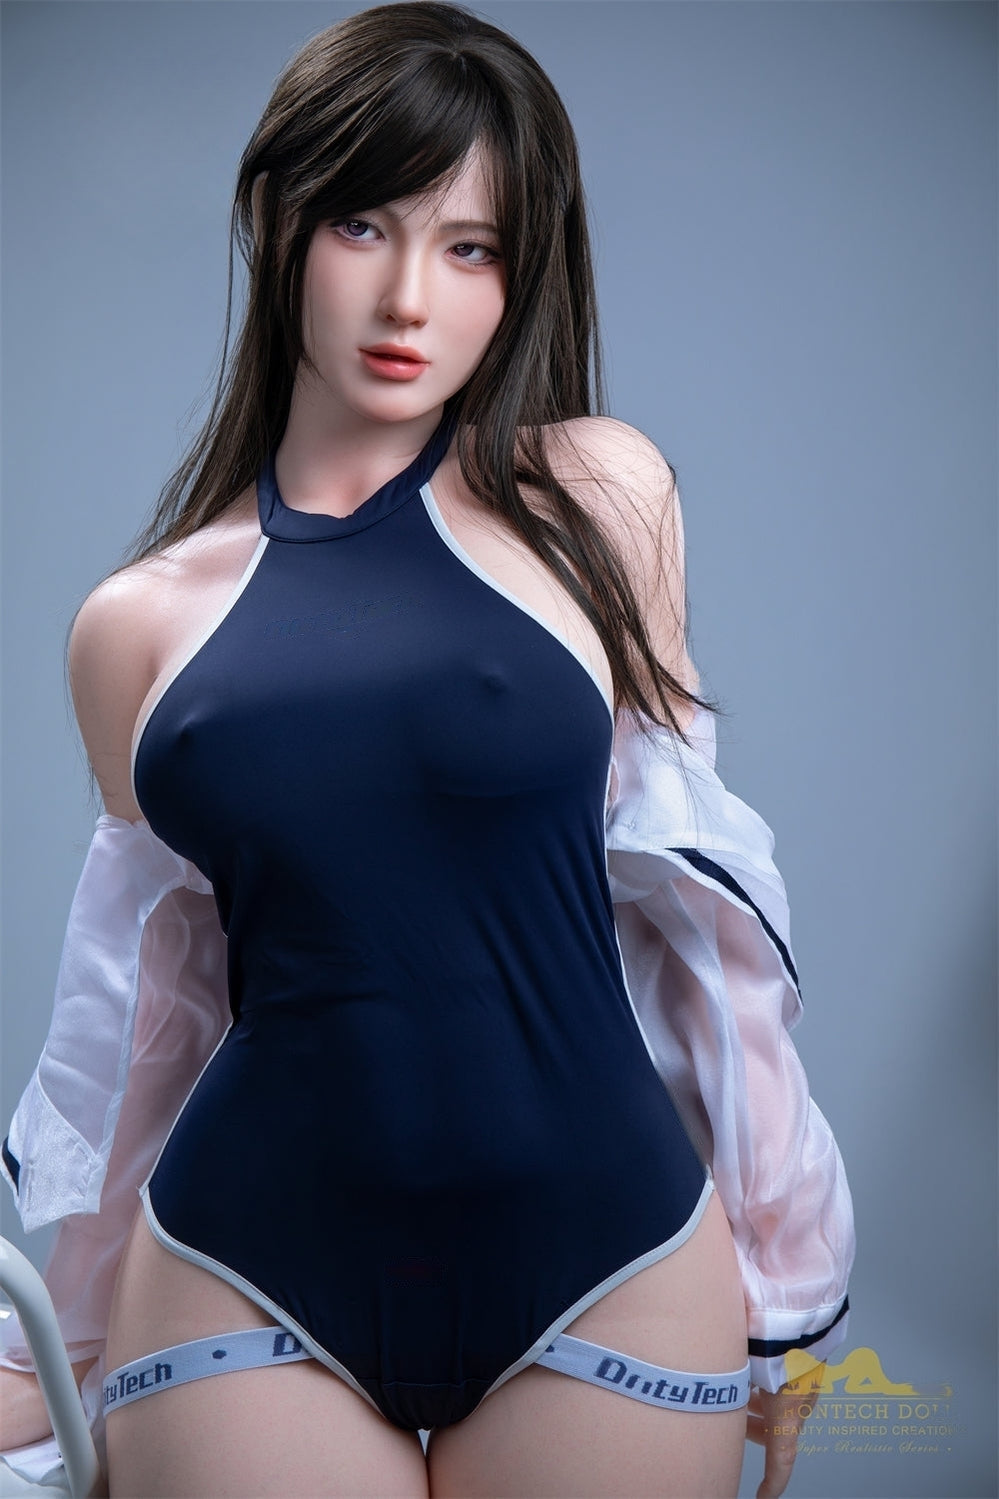 Irontech - Silicone Realistic Sex Doll - 5ft 5in (164cm) - Vivian - Love Dolls 4U